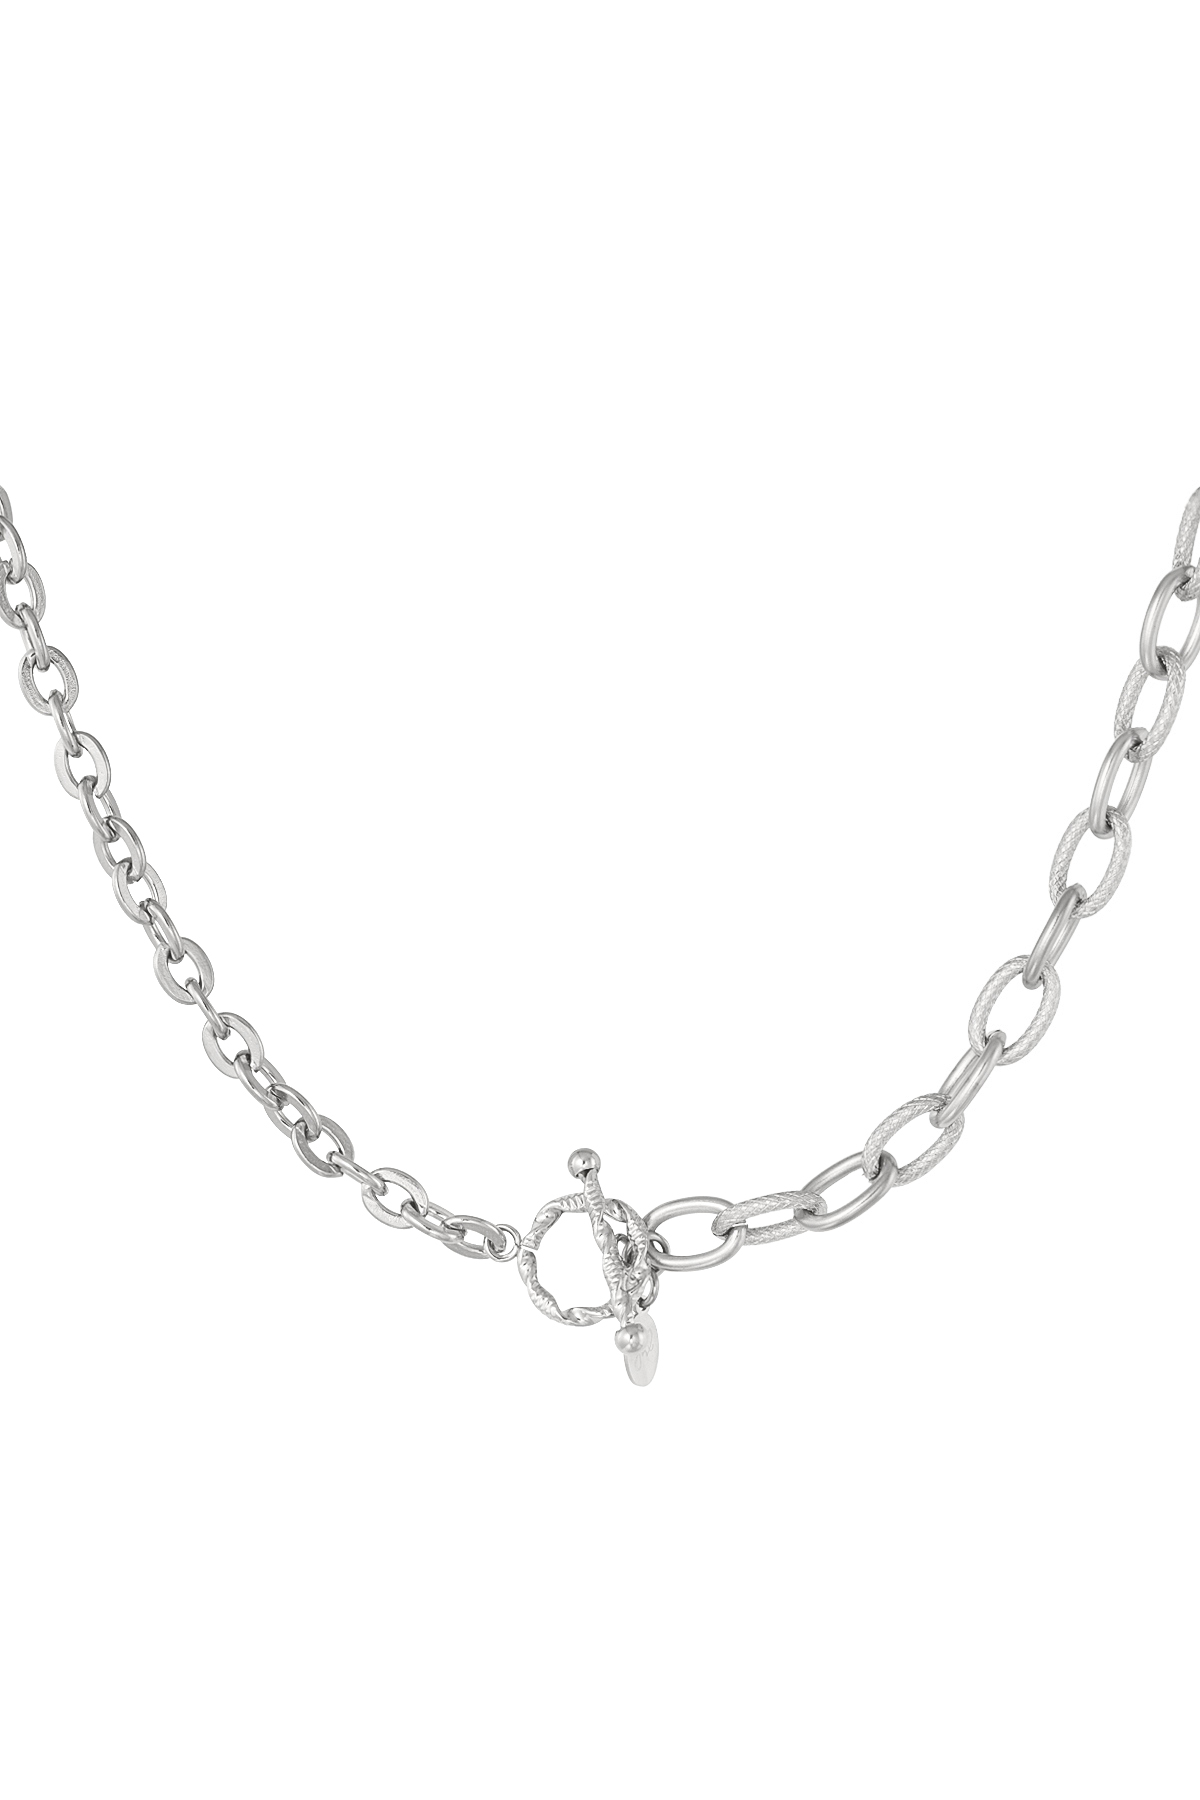 Link chain 2 sizes with round closure - silver h5 